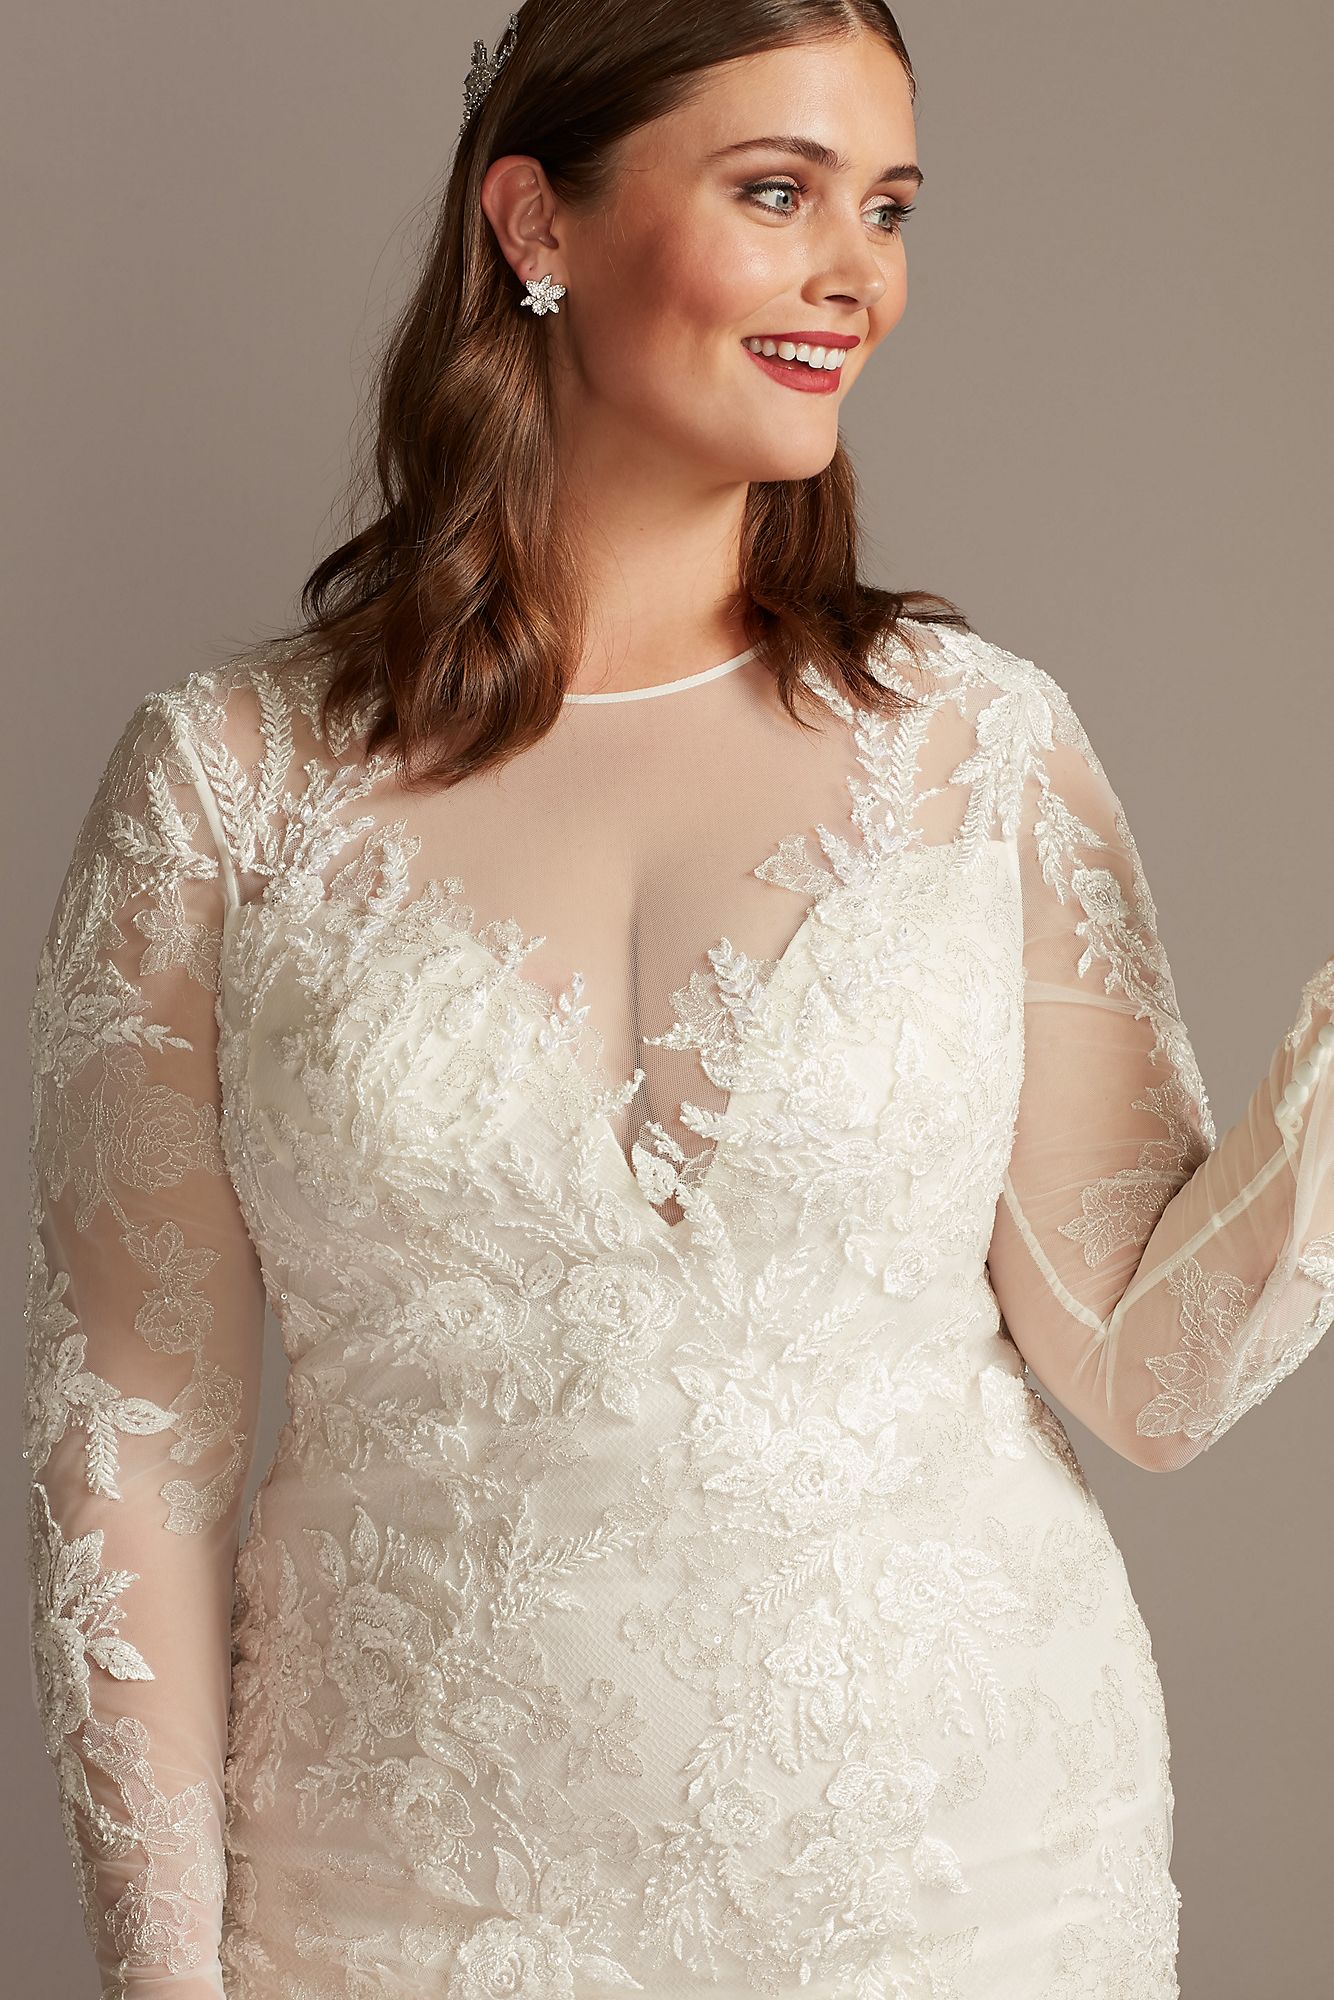 Plus Size Long Sleeves Mermaid Lace Embroidered 8CWG844 Style Wedding Dress